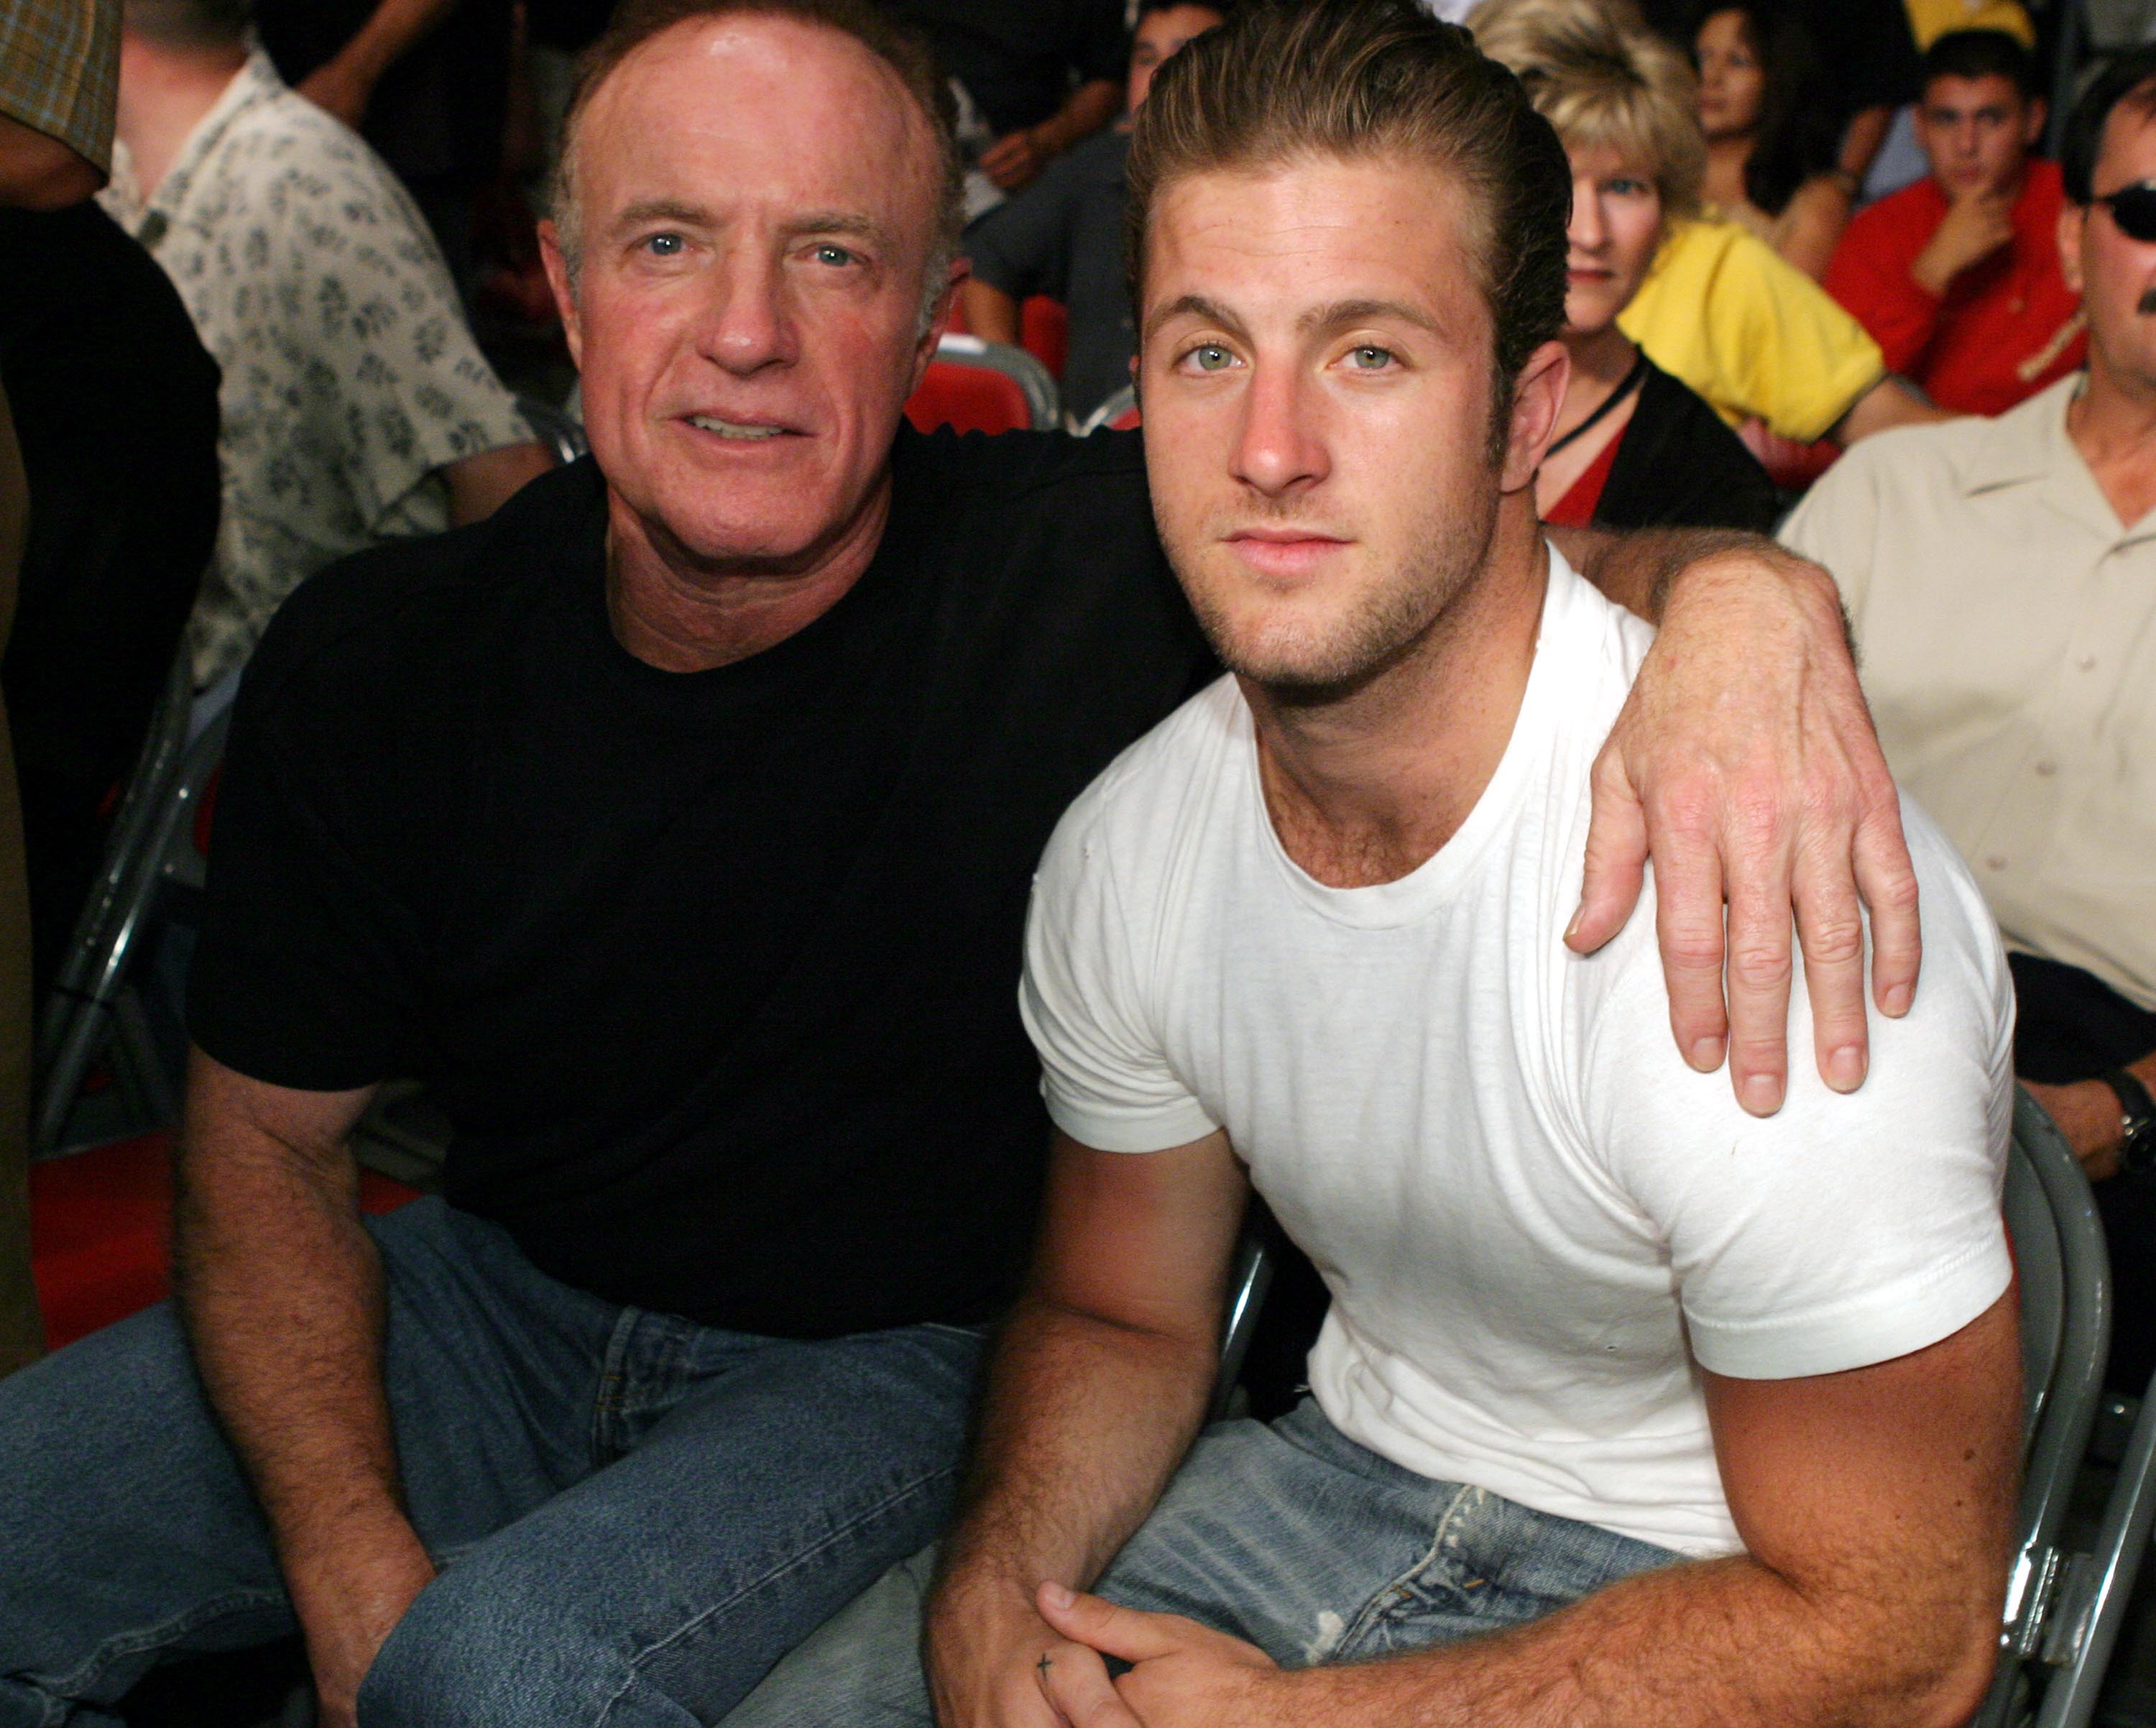 James and Scott Caan during a boxing match at The Grand Olympic Auditorium in Los Angeles, California, on July 26, 2003. | Source: Getty Images